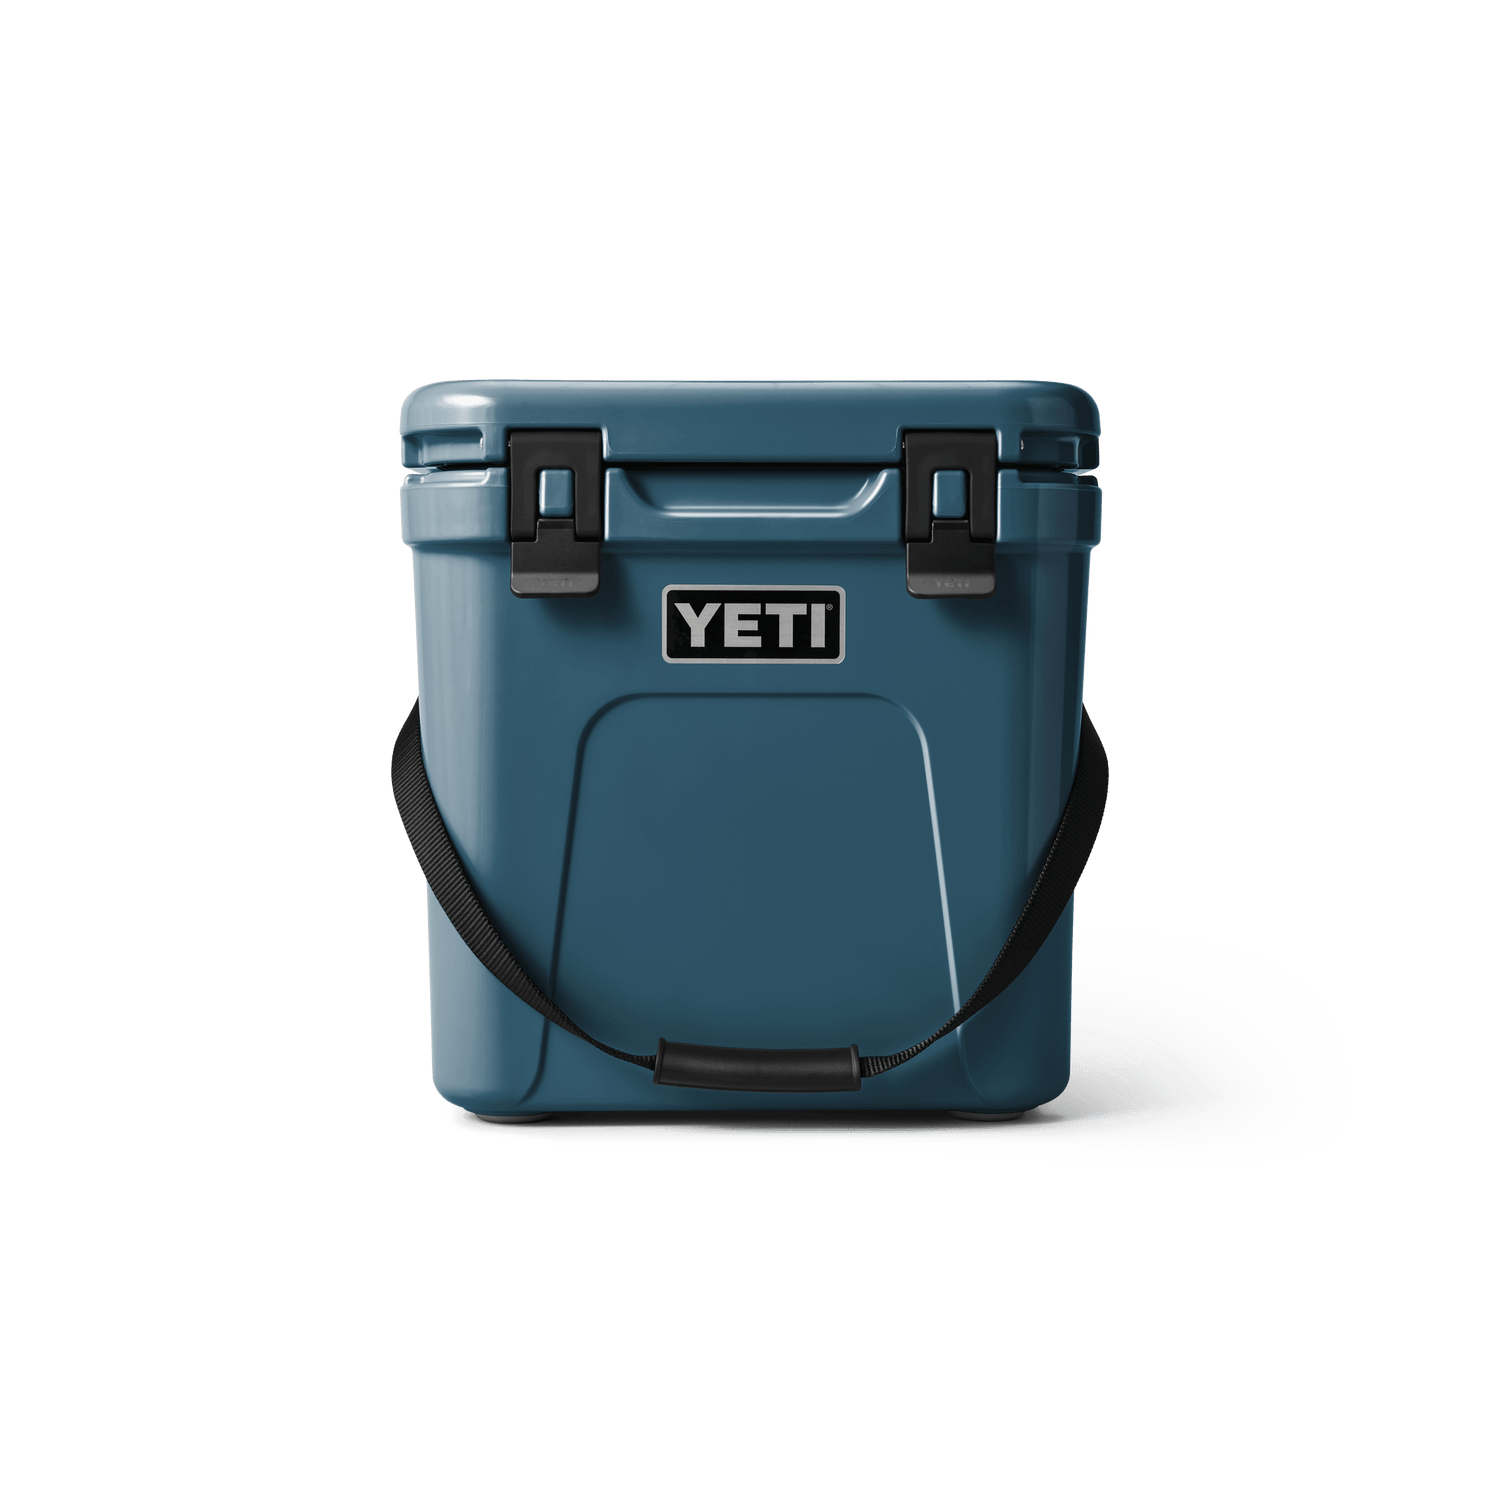 Started to collect Nordic Blue last week : r/YetiCoolers